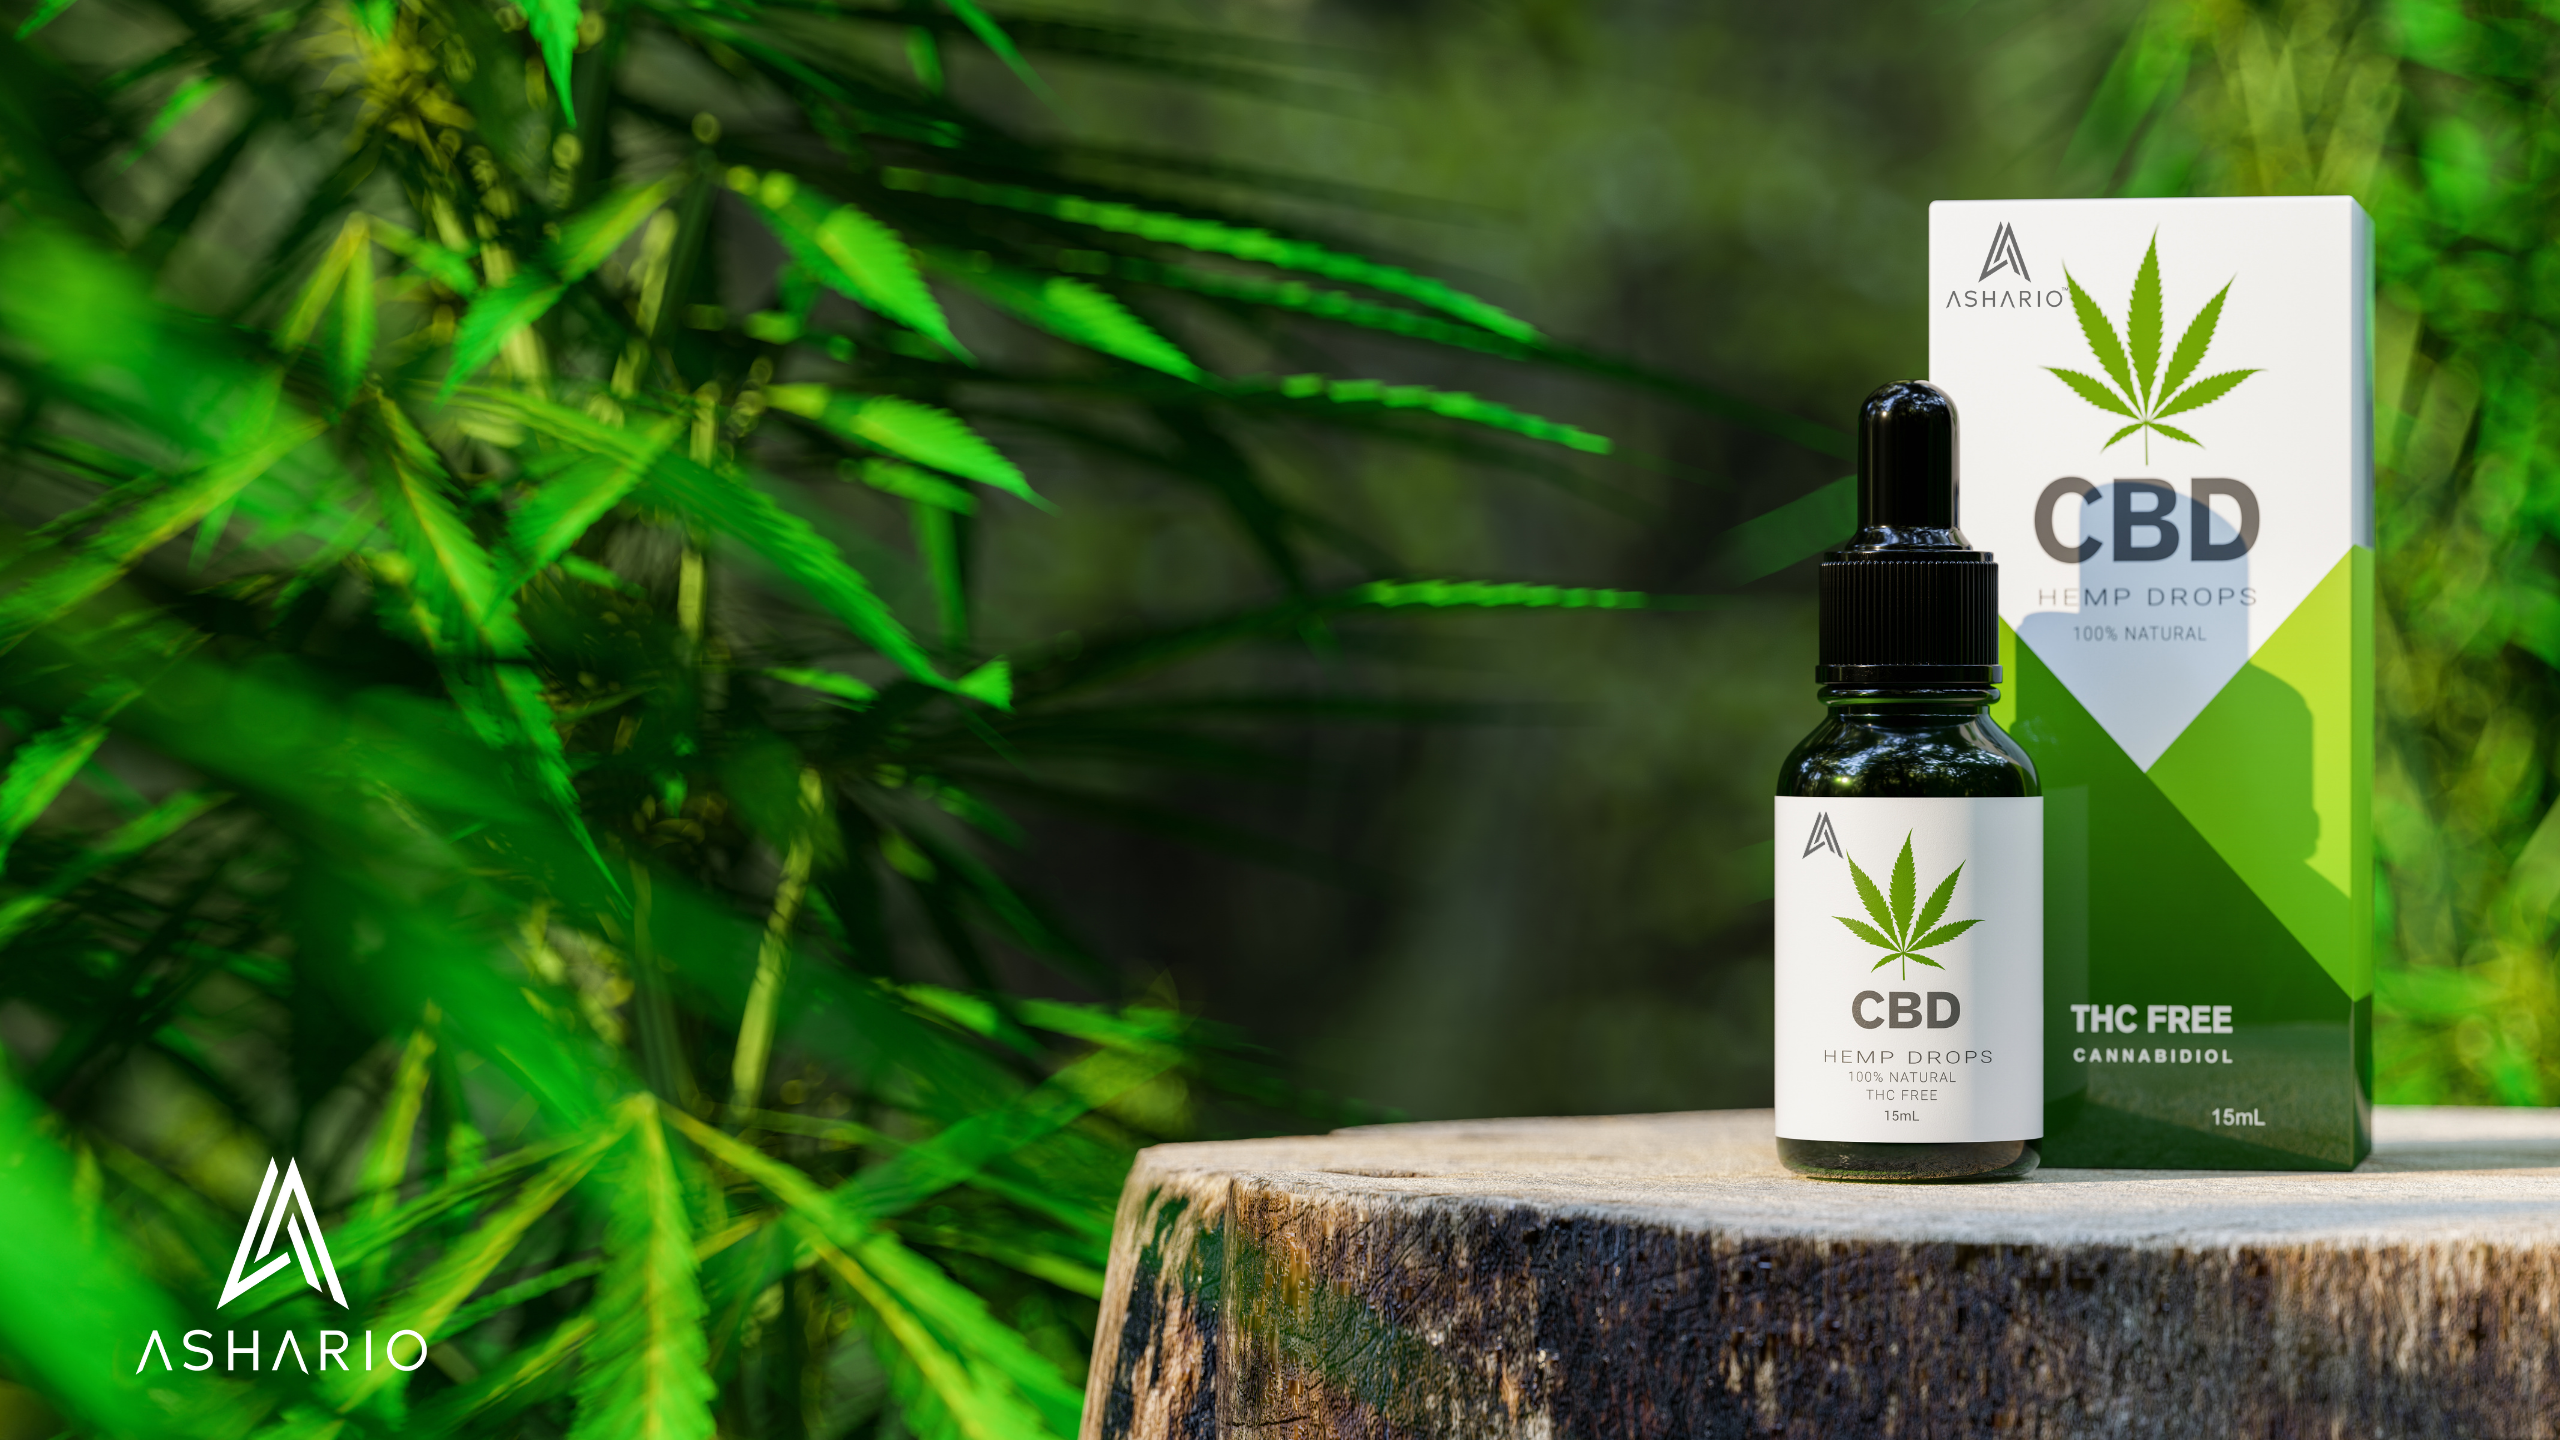 Explore the world of CBD products at Ashario Cannabis in North York with our comprehensive guide. Whether you're new to CBD or a seasoned enthusiast, we have everything you need to incorporate this versatile cannabinoid into your wellness routine.